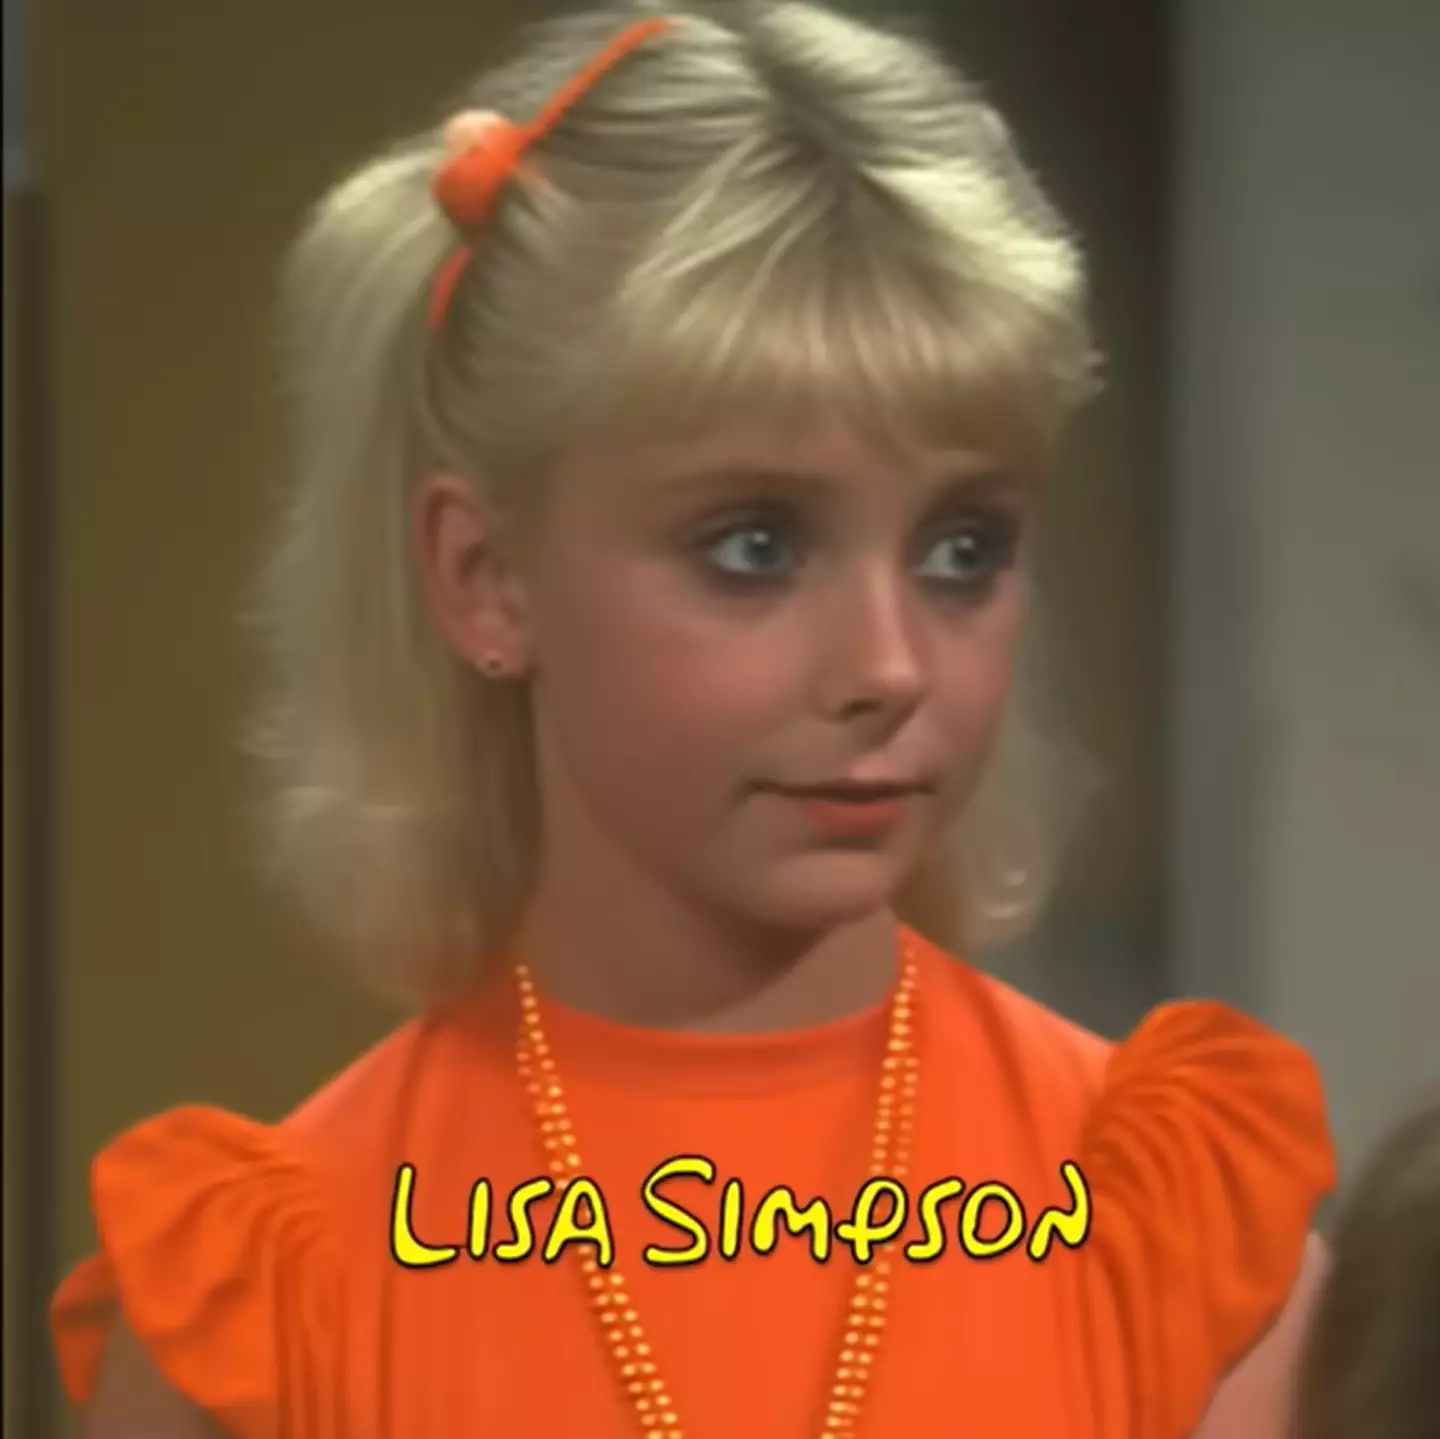 Lisa was also in the AI-generated video.